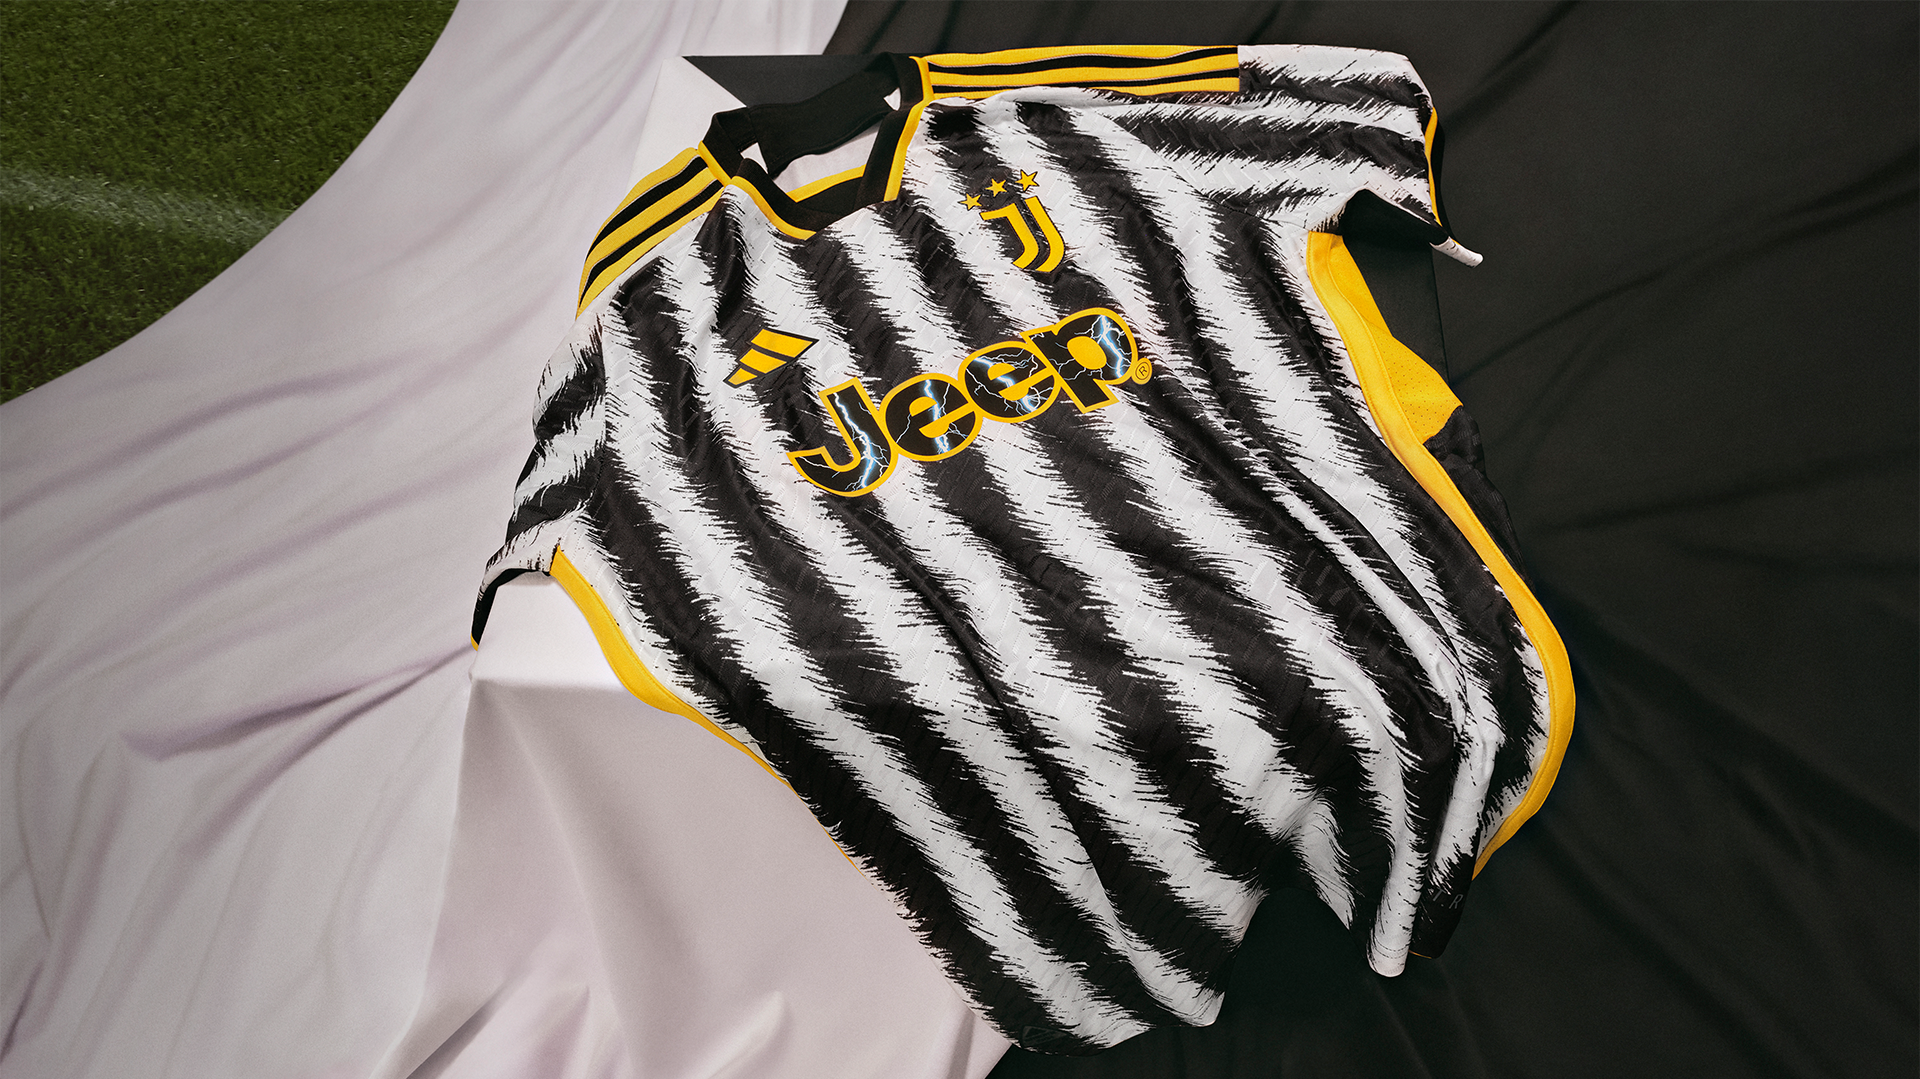 Juventus Kit New Home Away And Third Jerseys Release